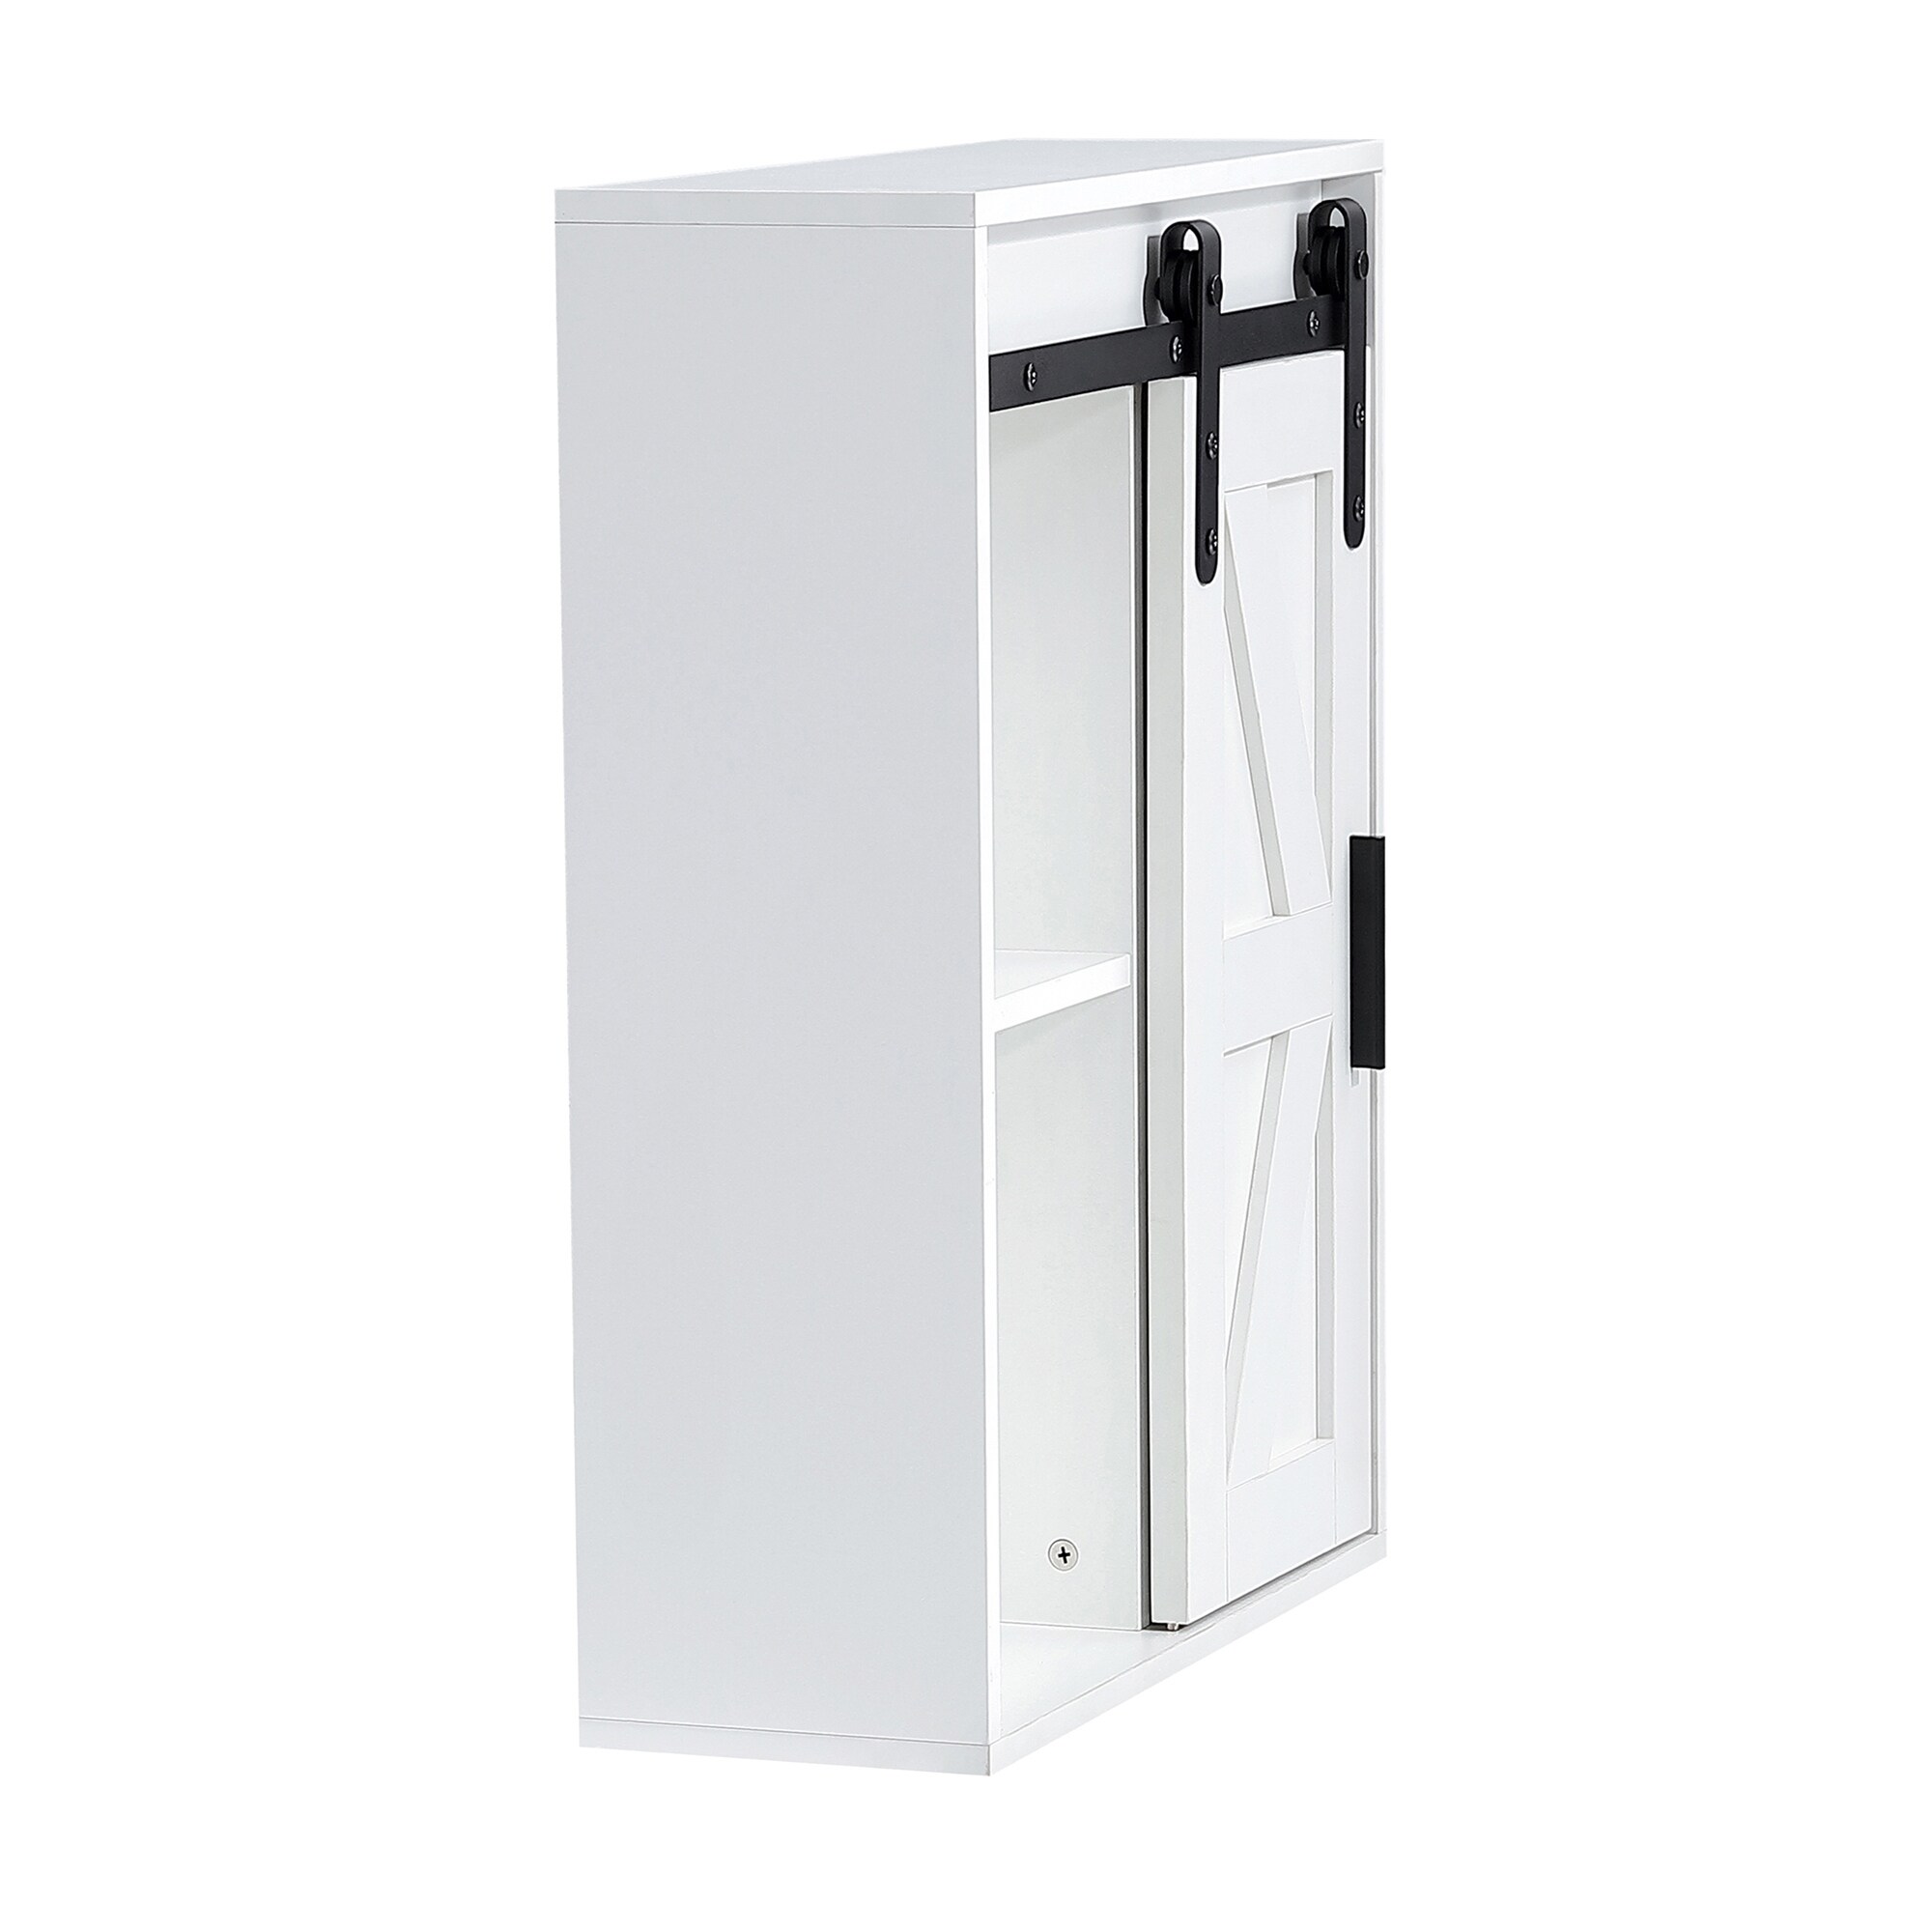 https://ak1.ostkcdn.com/images/products/is/images/direct/50df21075d1e62e082582df899fac08e21db0aec/Bathroom-Cabinet-Wall-Mounted-White-Medicine-Cabinet-with-Sliding-Barn-Door%2C-Over-The-Toilet-Storage-Cabinet-for-Livingroom.jpg